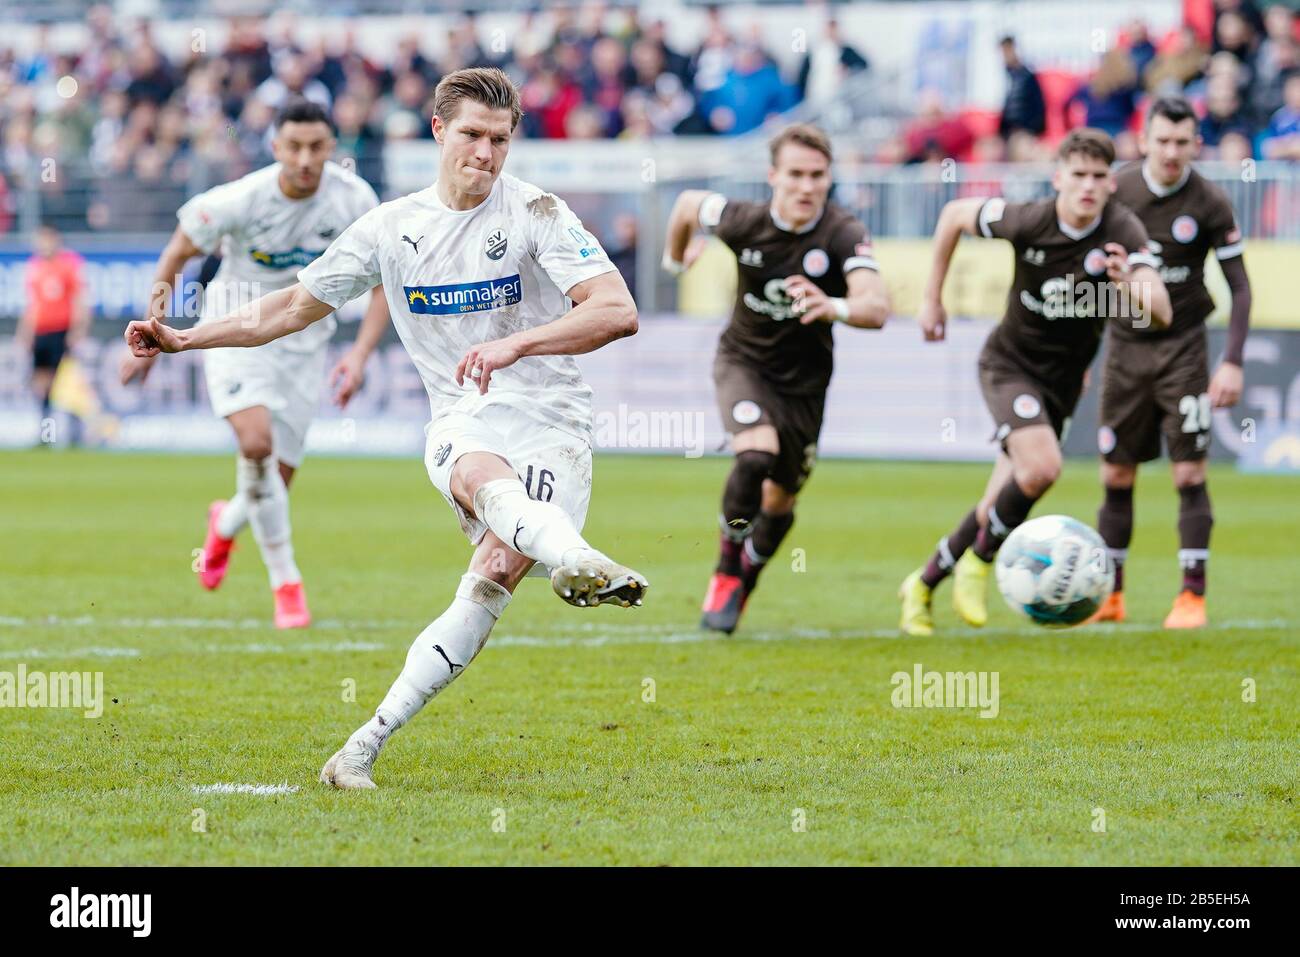 Sandhausen, Germany. 08th Mar, 2020. Football: 2nd Bundesliga, 25th matchday, SV Sandhausen - FC St. Pauli, Hardtwaldstadion. Sandhausen's Kevin Behrens scores the penalty goal for the 1:1. Credit: Uwe Anspach/dpa - IMPORTANT NOTE: In accordance with the regulations of the DFL Deutsche Fußball Liga and the DFB Deutscher Fußball-Bund, it is prohibited to exploit or have exploited in the stadium and/or from the game taken photographs in the form of sequence images and/or video-like photo series./dpa/Alamy Live News Stock Photo